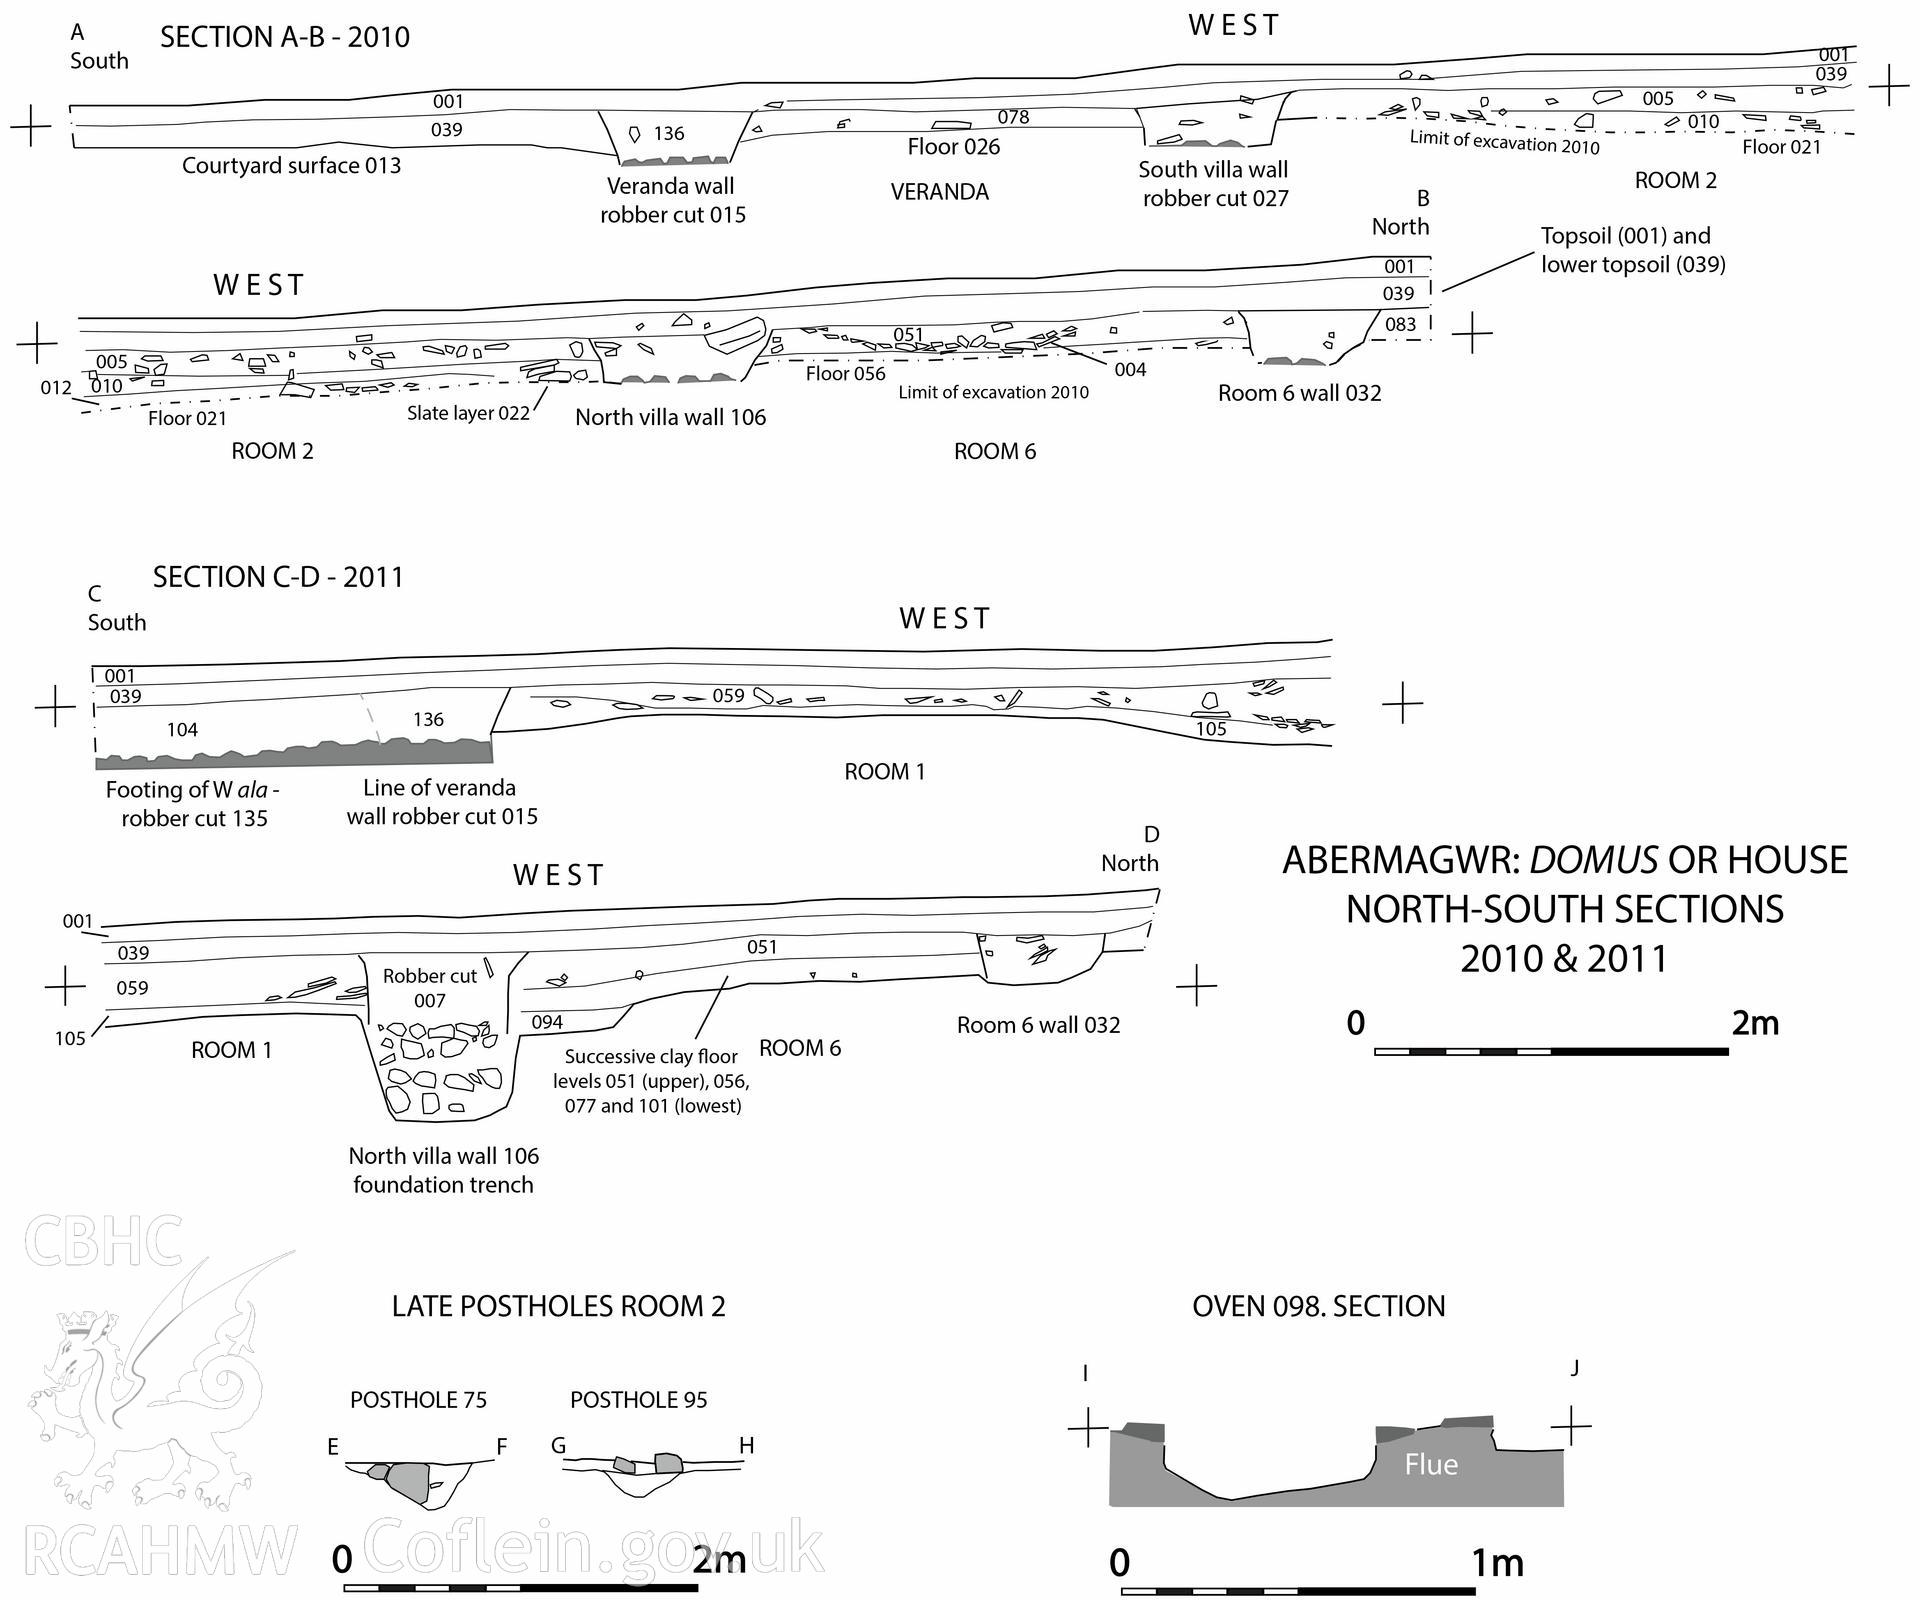 Arch Camb 167 (2018) 143-219. "The Romano-British villa at Abermagwr, Ceredigion: excavations 2010-2015" by Davies and Driver. Web-friendly .tif version of Fig 8. Section drawings of Trenches A and C.